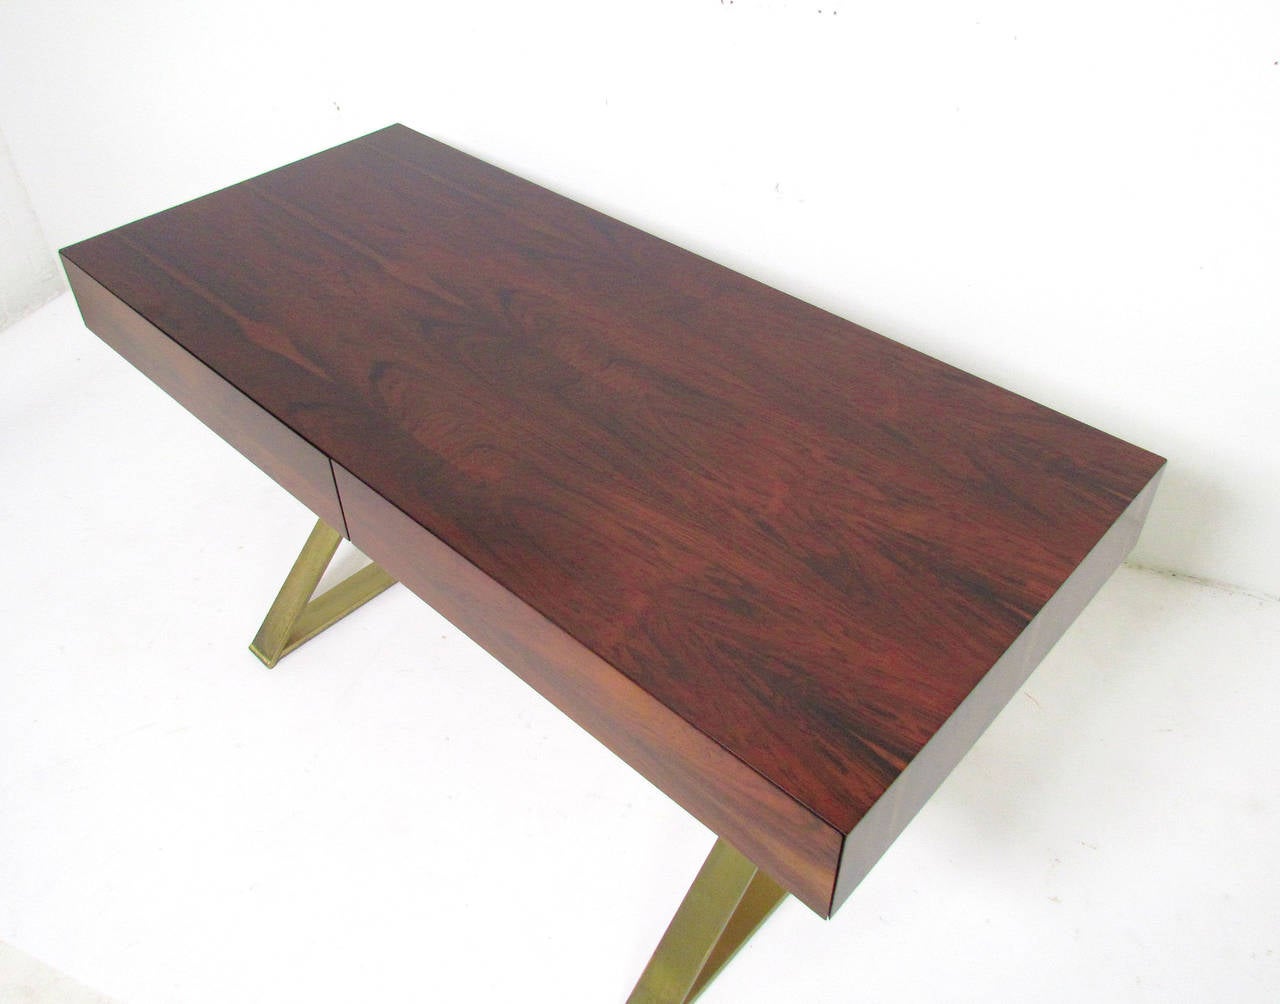 American Rare Flush Front Campaign Desk in Rosewood by Milo Baughman